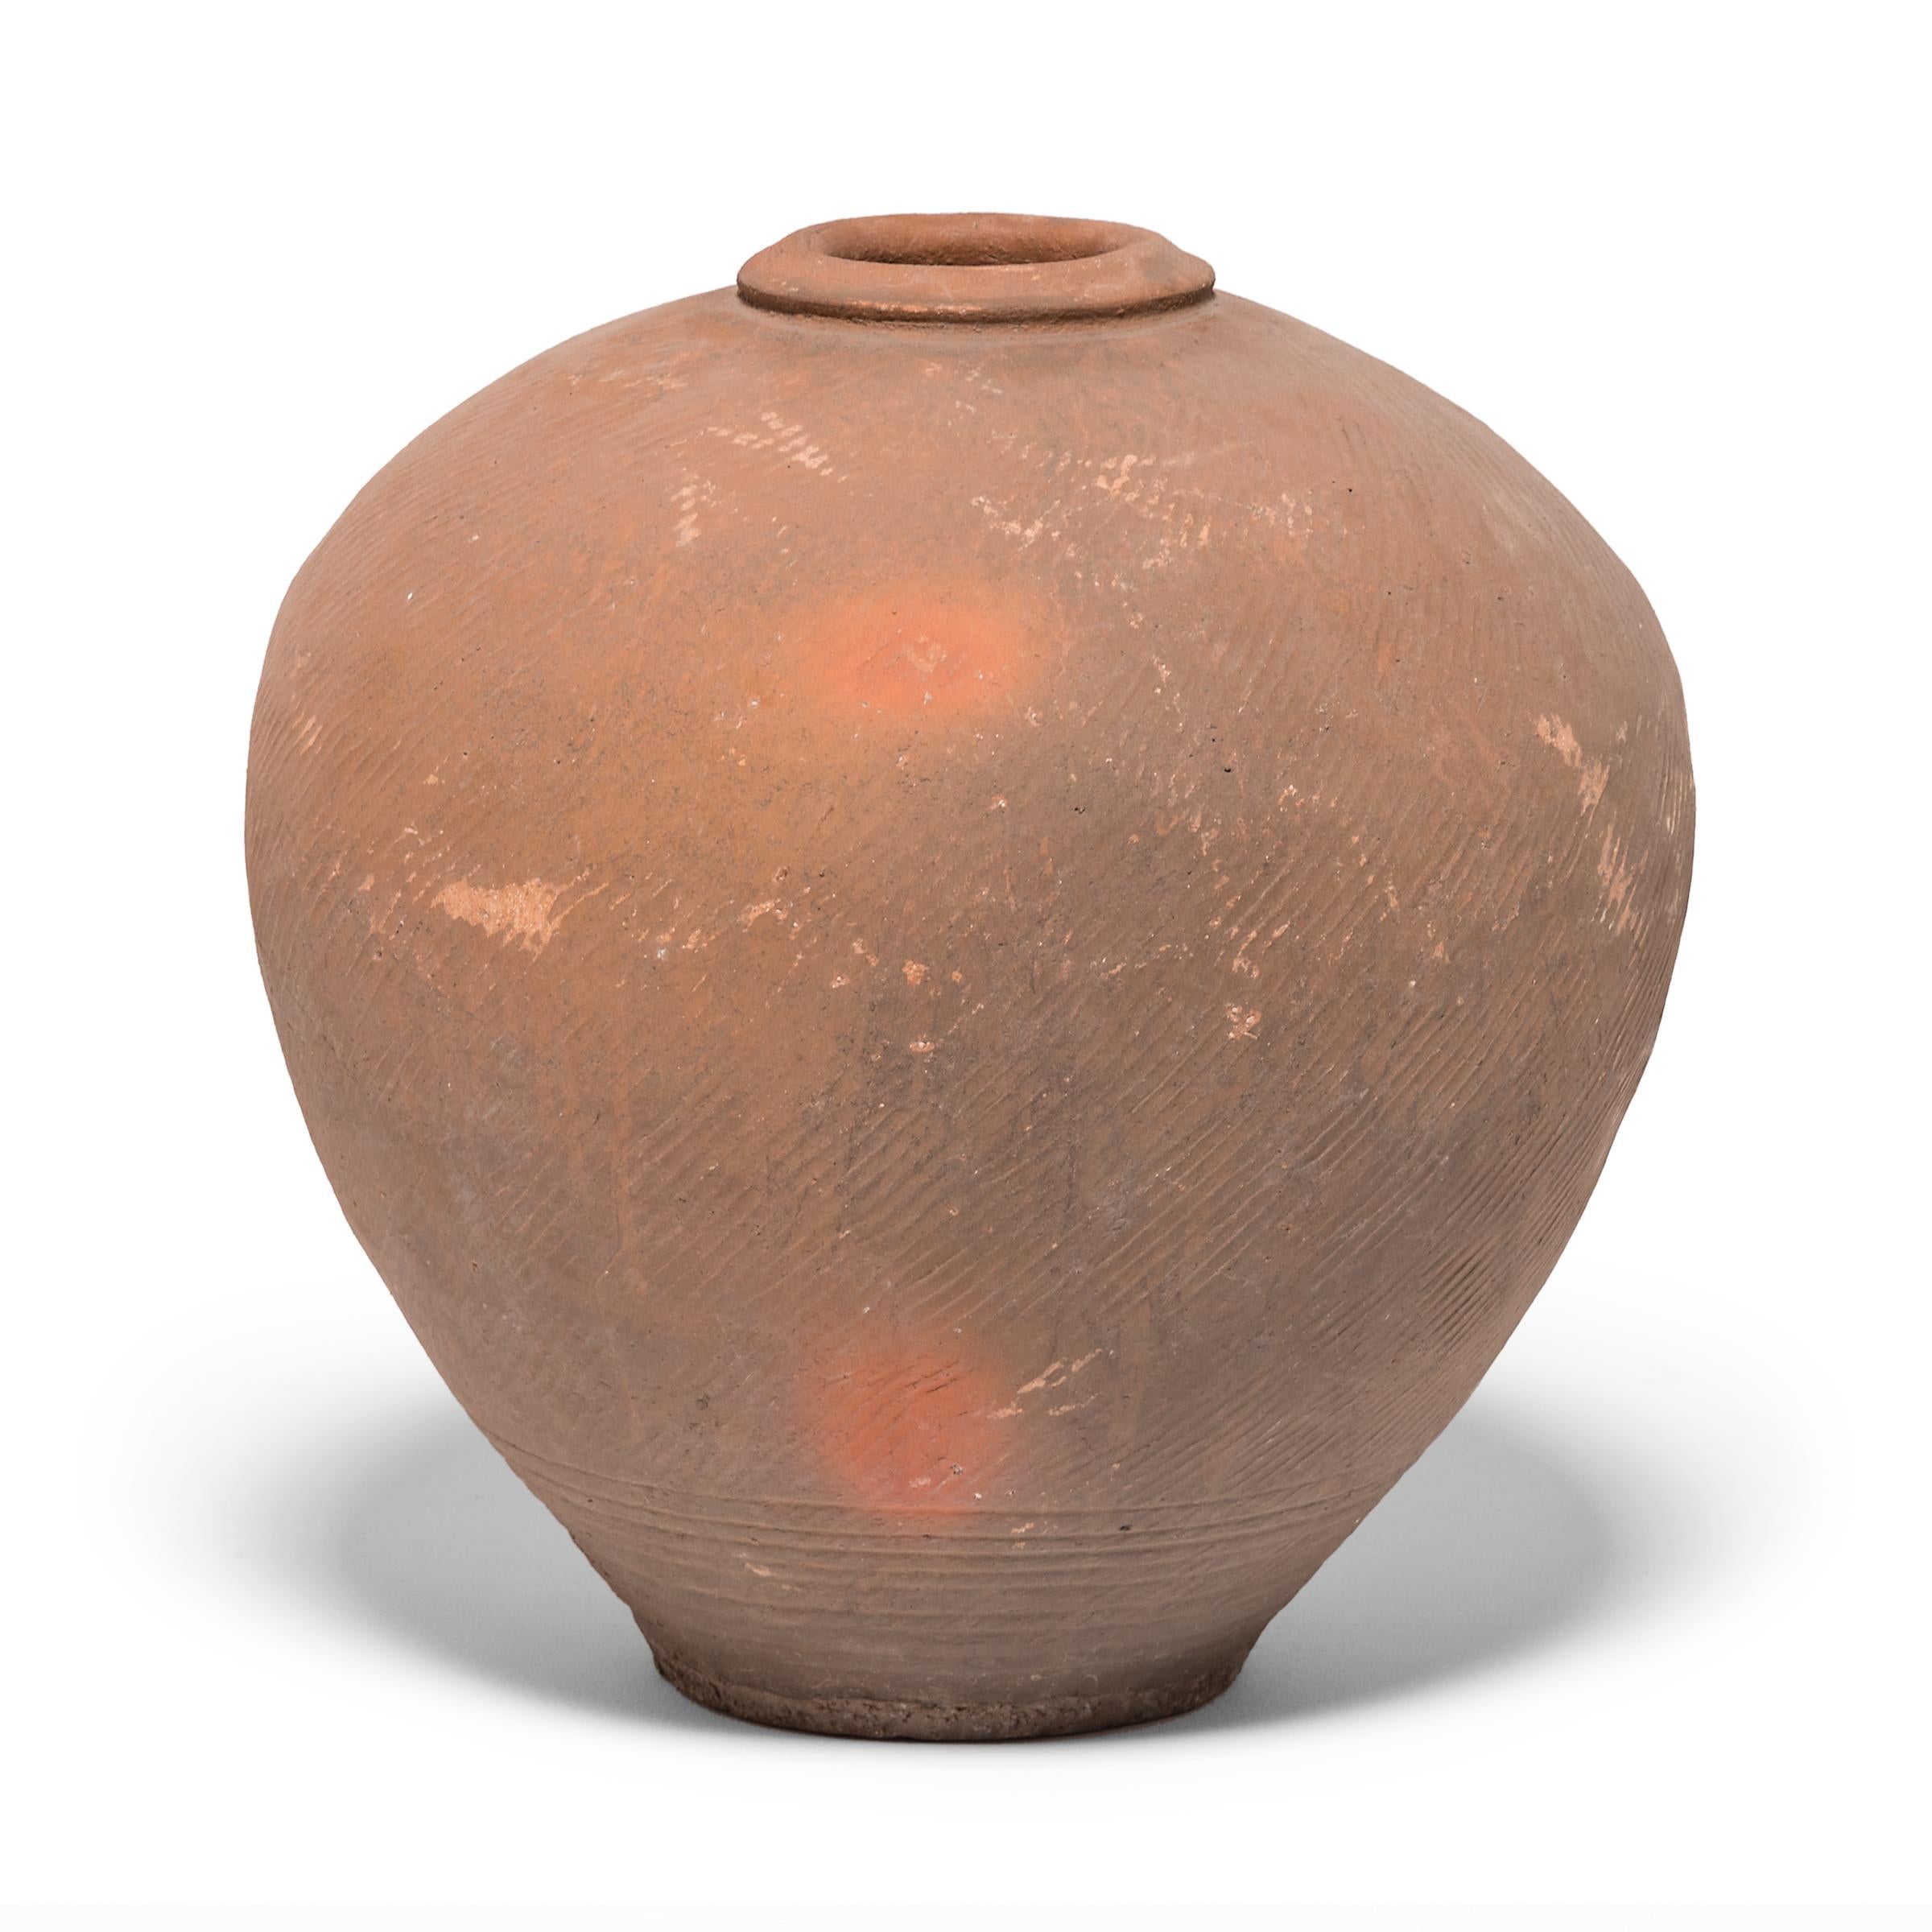 This late 19th century ceramic jar from northern China is formed in a traditional shape meant for storing wine and spirits made from rice and grains. Variation during firing has resulted in delightfully irregular patterns over its textured surface,